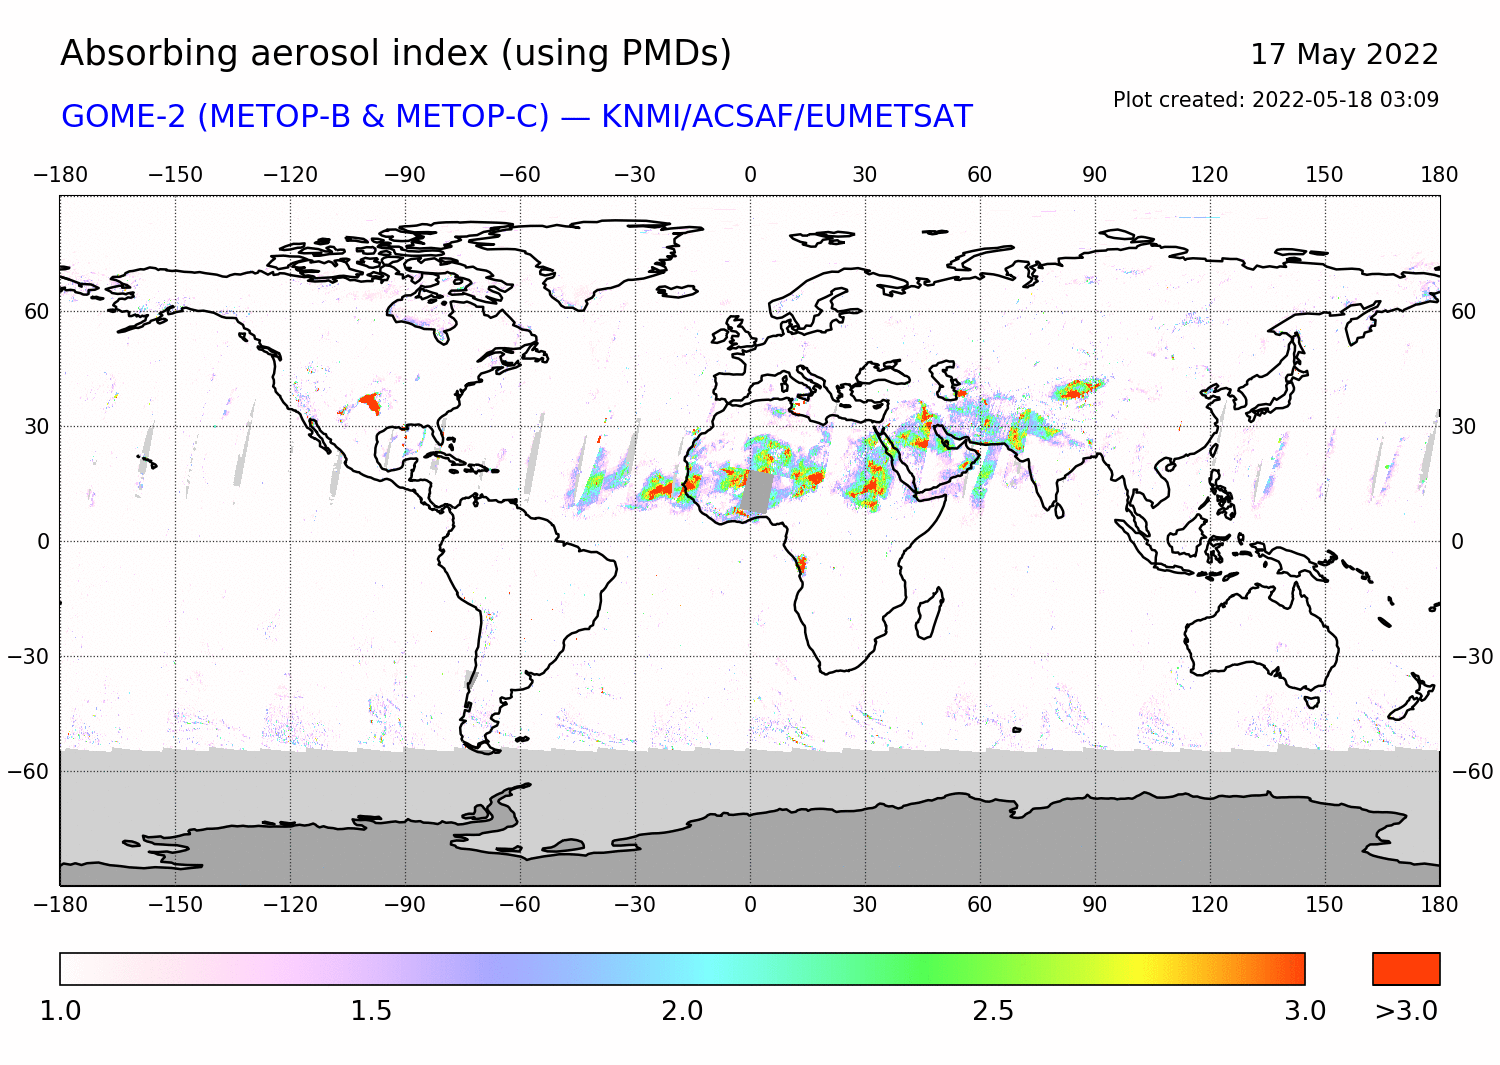 GOME-2 - Absorbing aerosol index of 17 May 2022